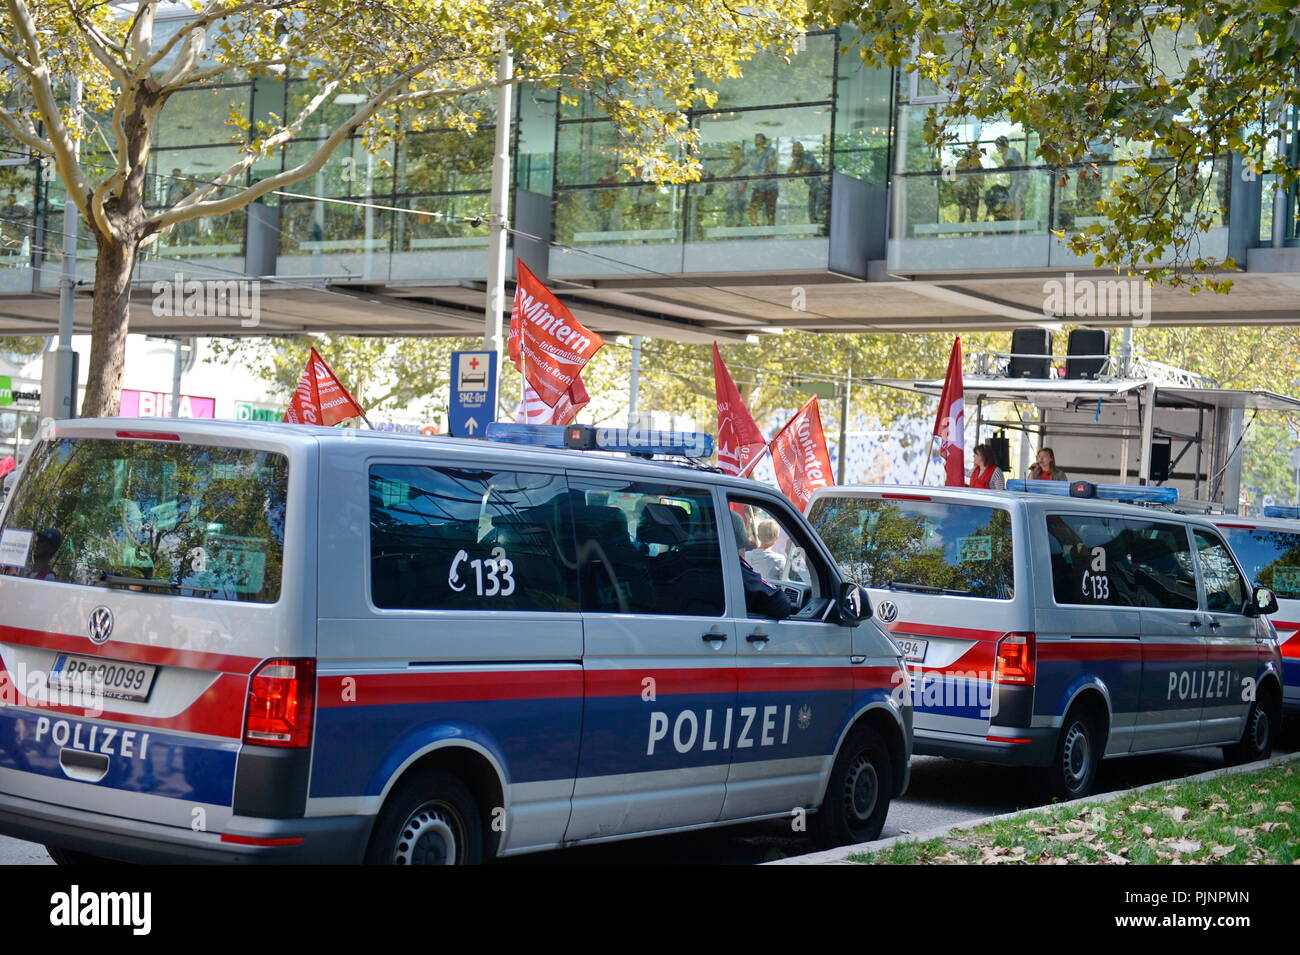 Vienna, Austria. 8th September 2018. Meeting of EU finance ministers at the Austria Center Vienna. Opponents of neo-liberal austerity protest against the meeting. An alliance of trade union, anti-fascist and progressive organizations is calling for a summit meeting in Kagran on 8 September under the slogan 'Fight with Money!' . Credit: Franz Perc / Alamy Live News Stock Photo